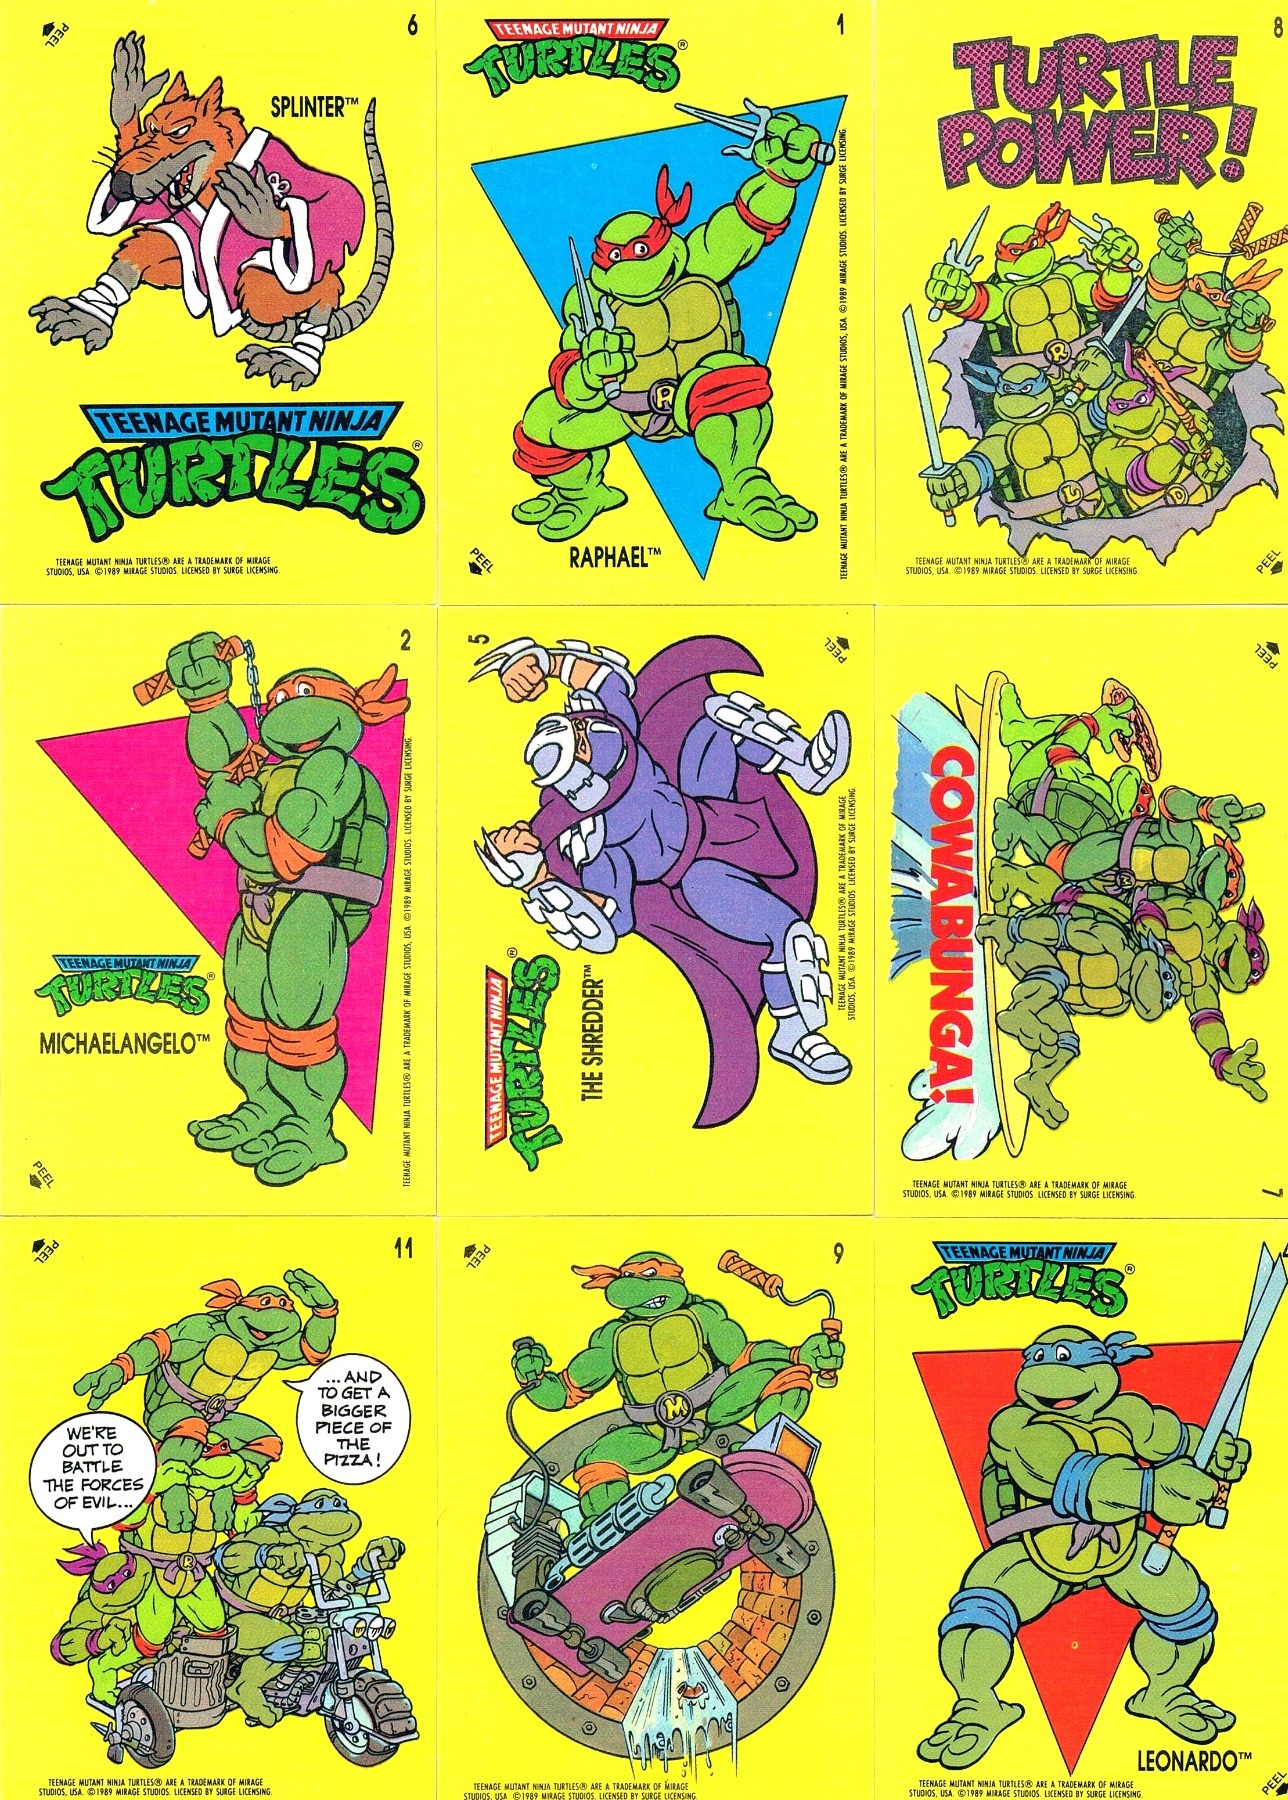 9 stickers from 1989